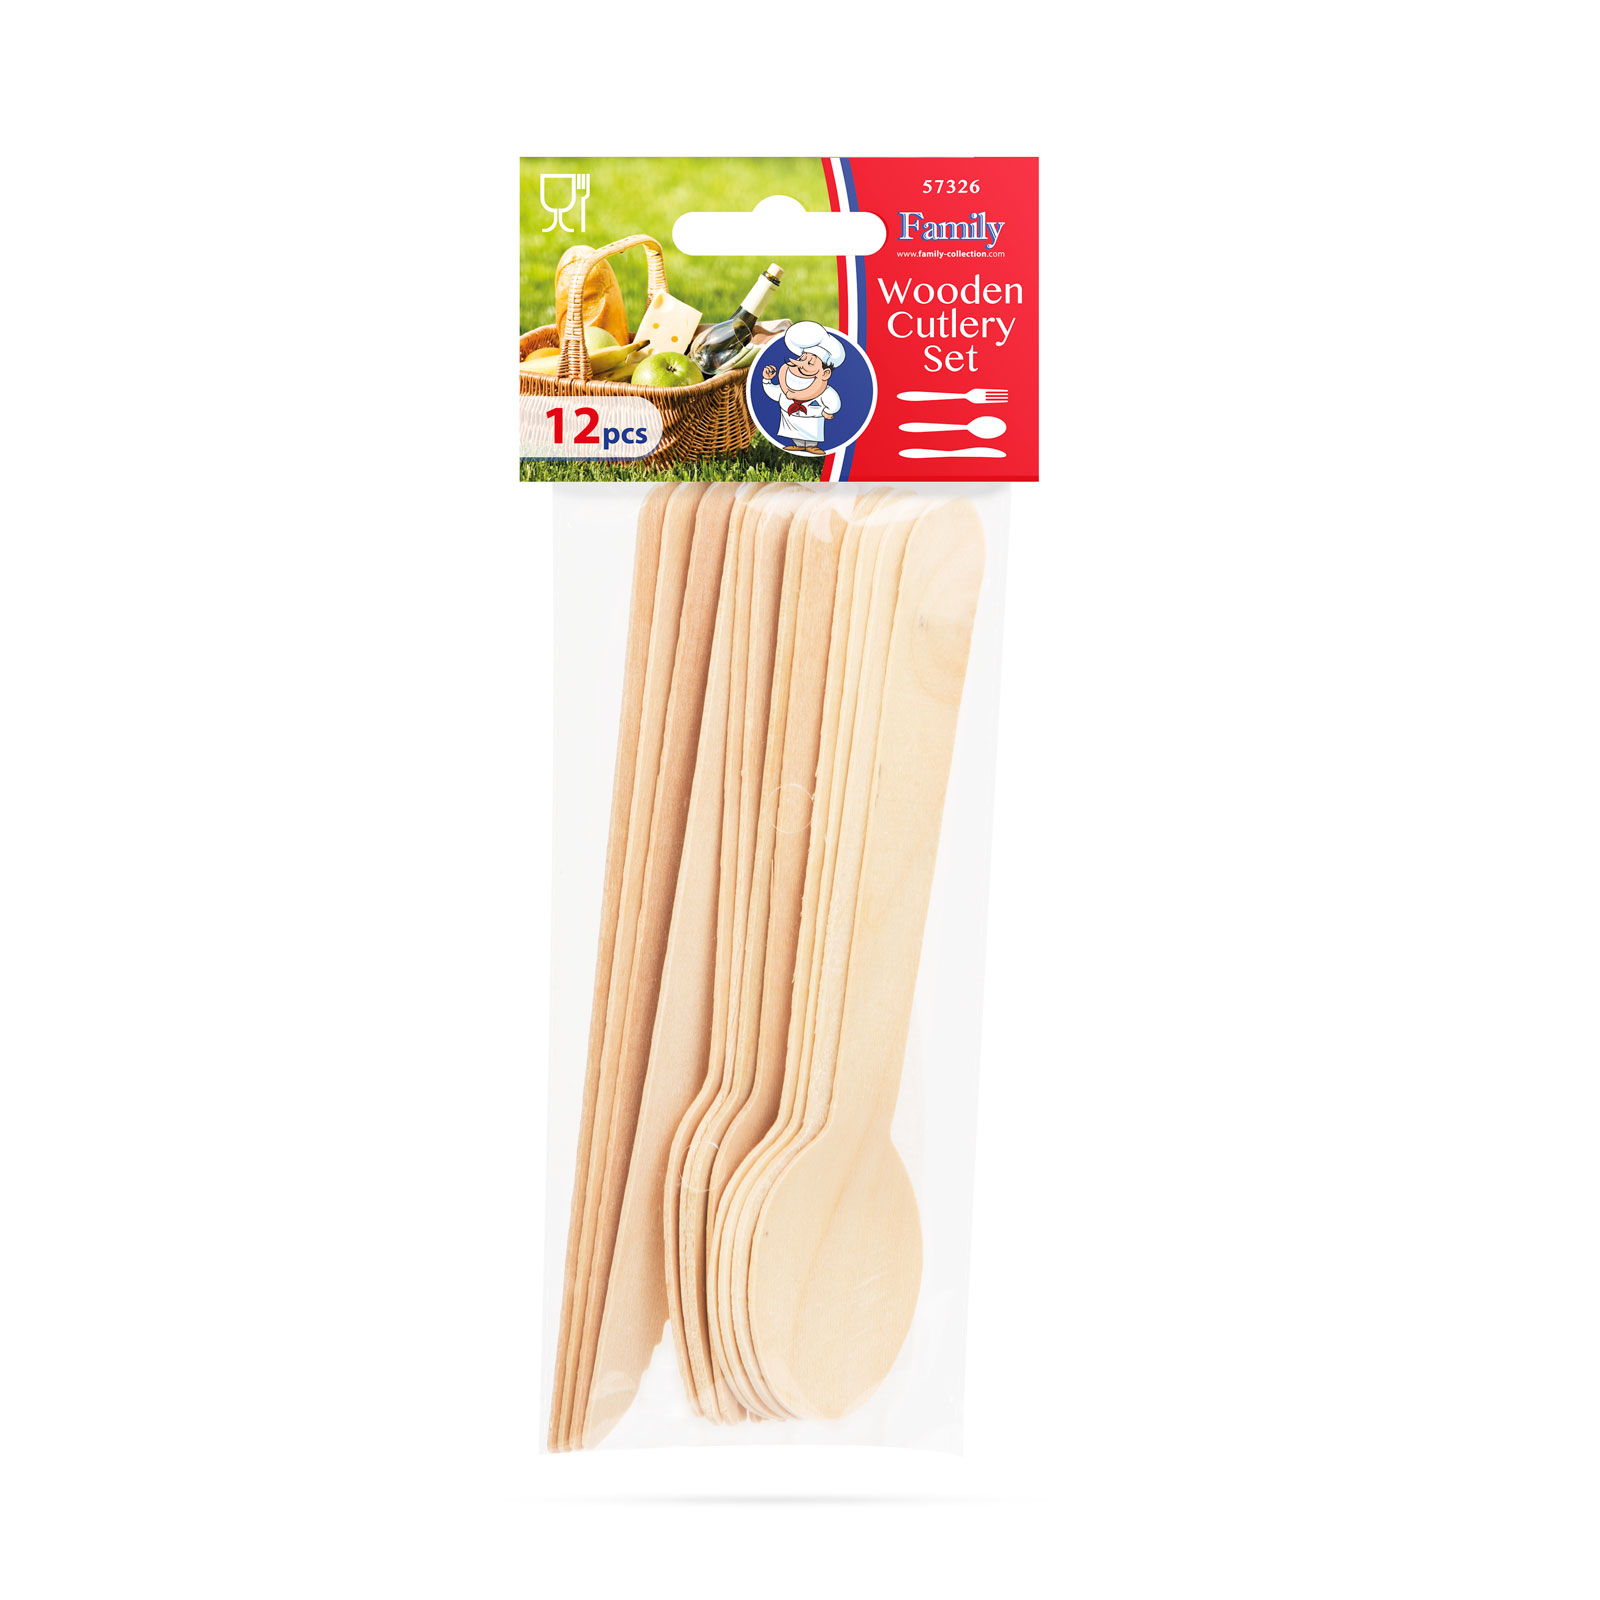 Wooden cutlery set - fork, spoon, knife - 12 pieces thumb